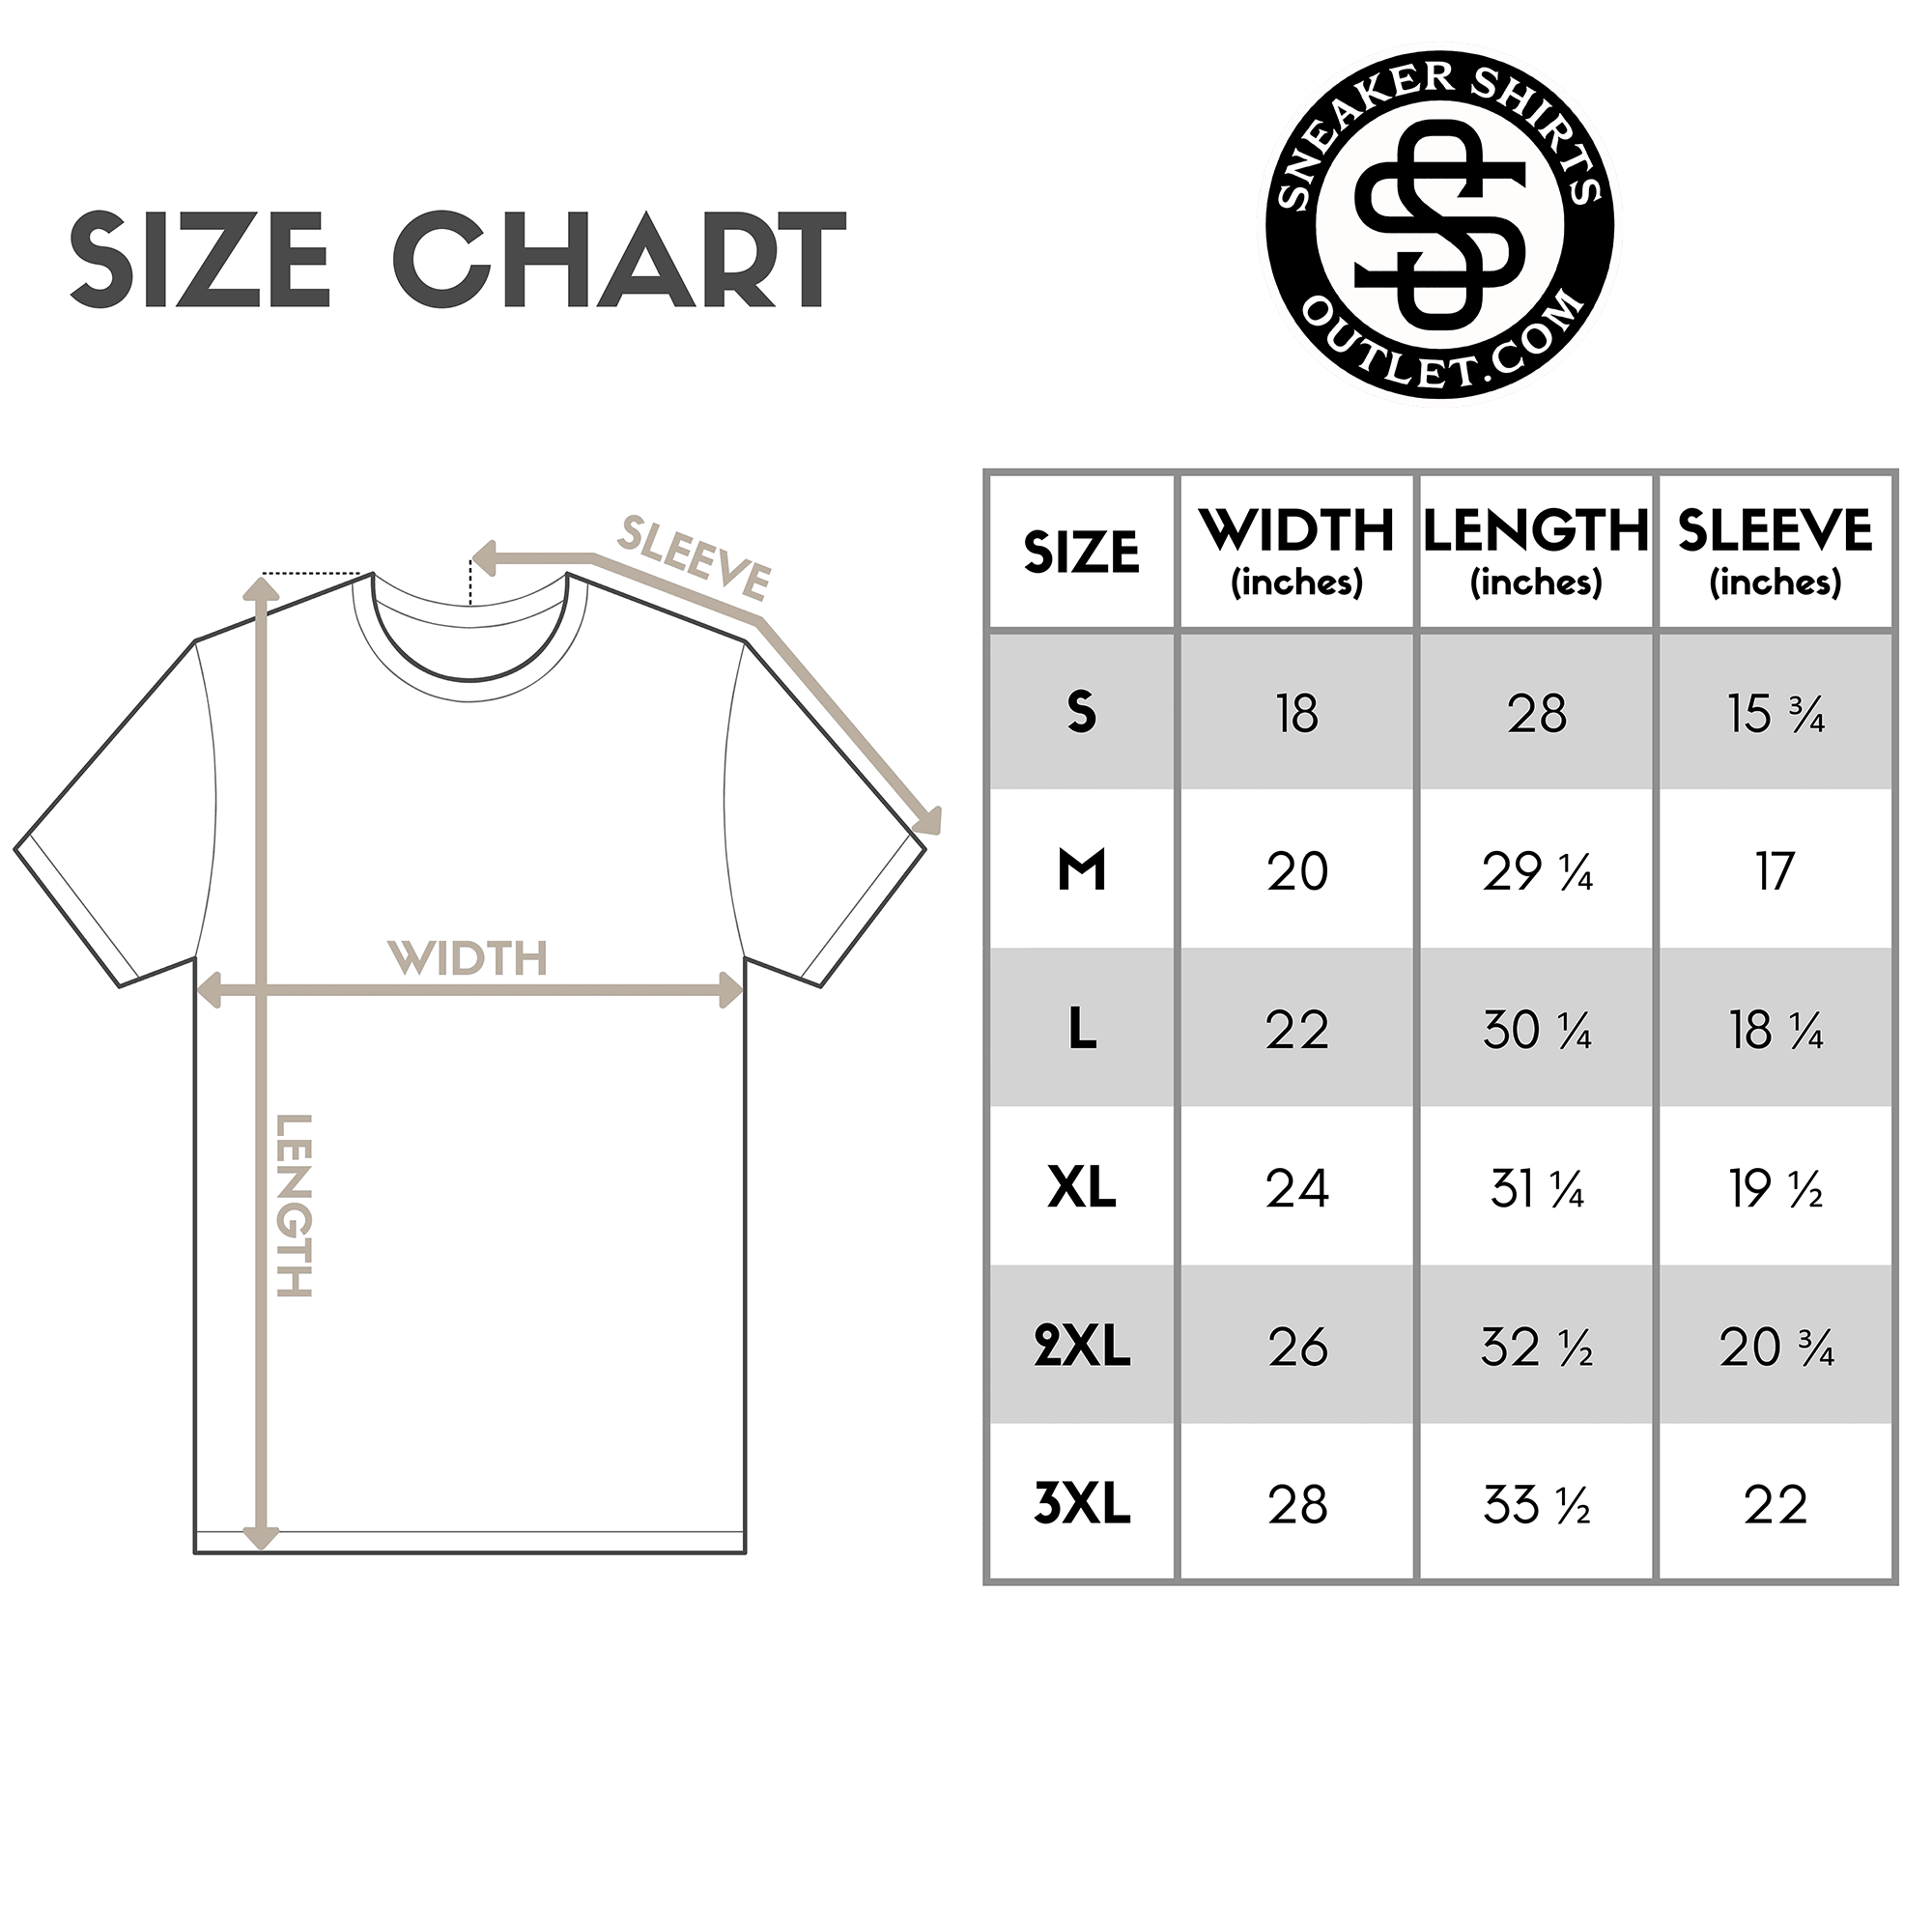 H for Hustle Shirt size chart photo